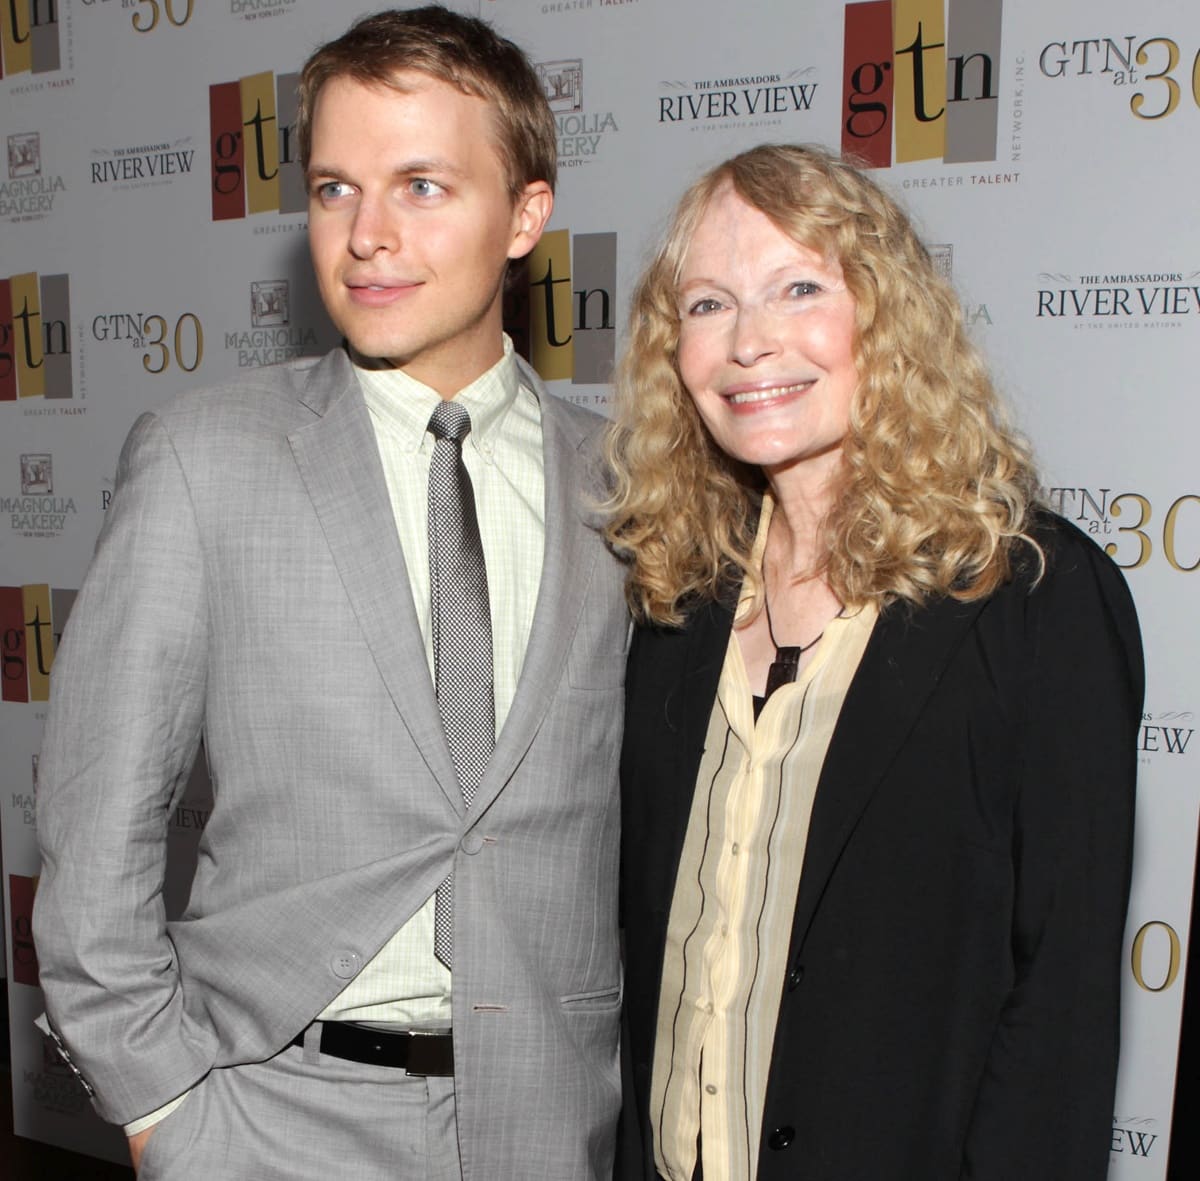 Ronan Farrow is Mia Farrow and Woody Allen’s first biological child